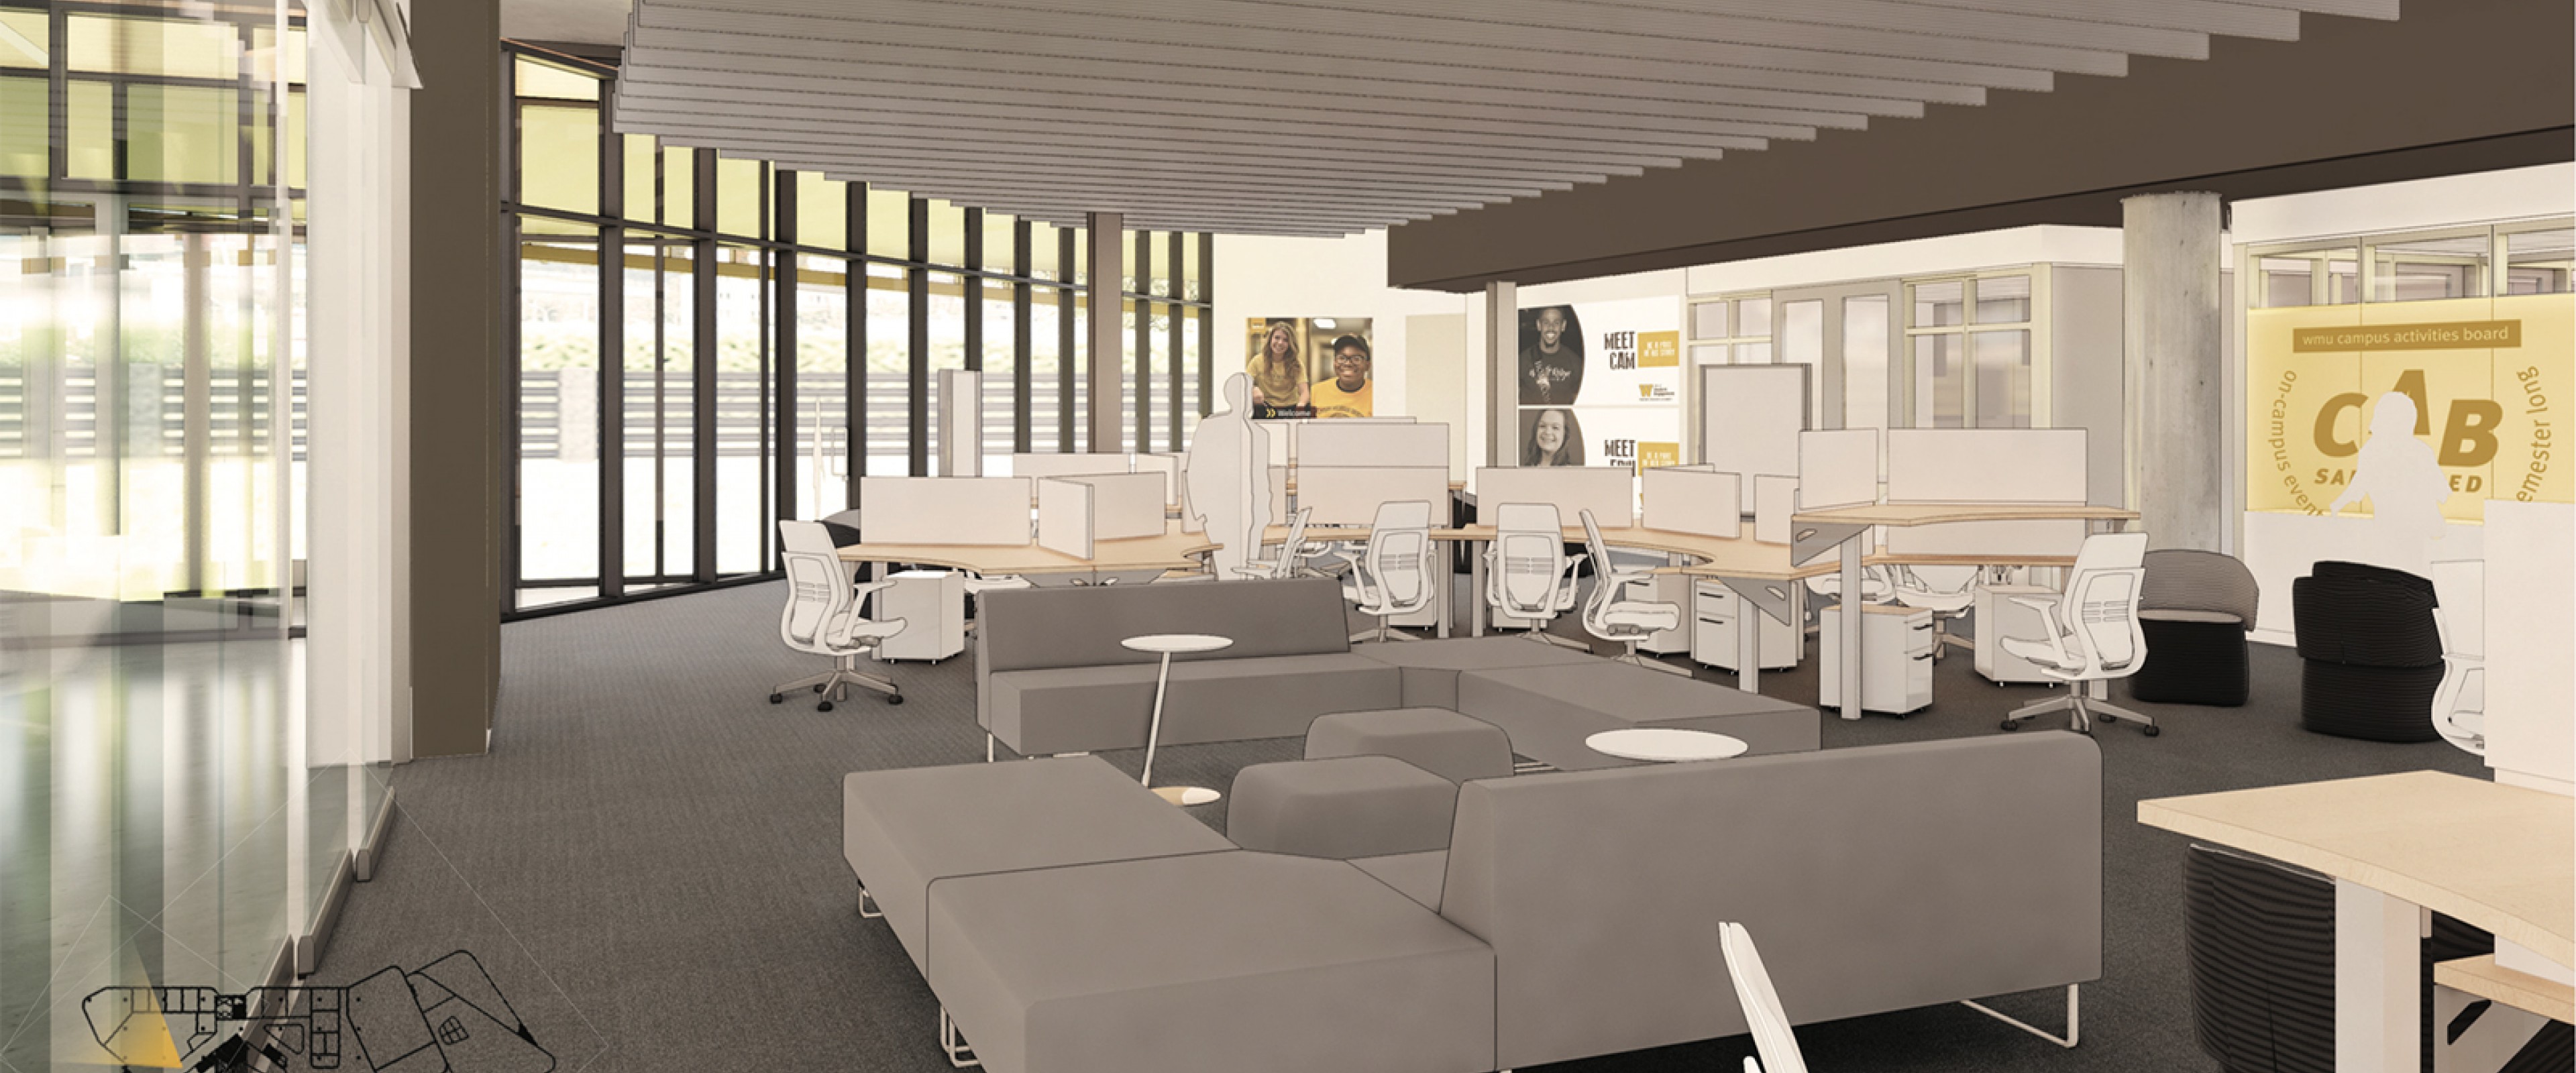 Student Organization Center in new Student Center